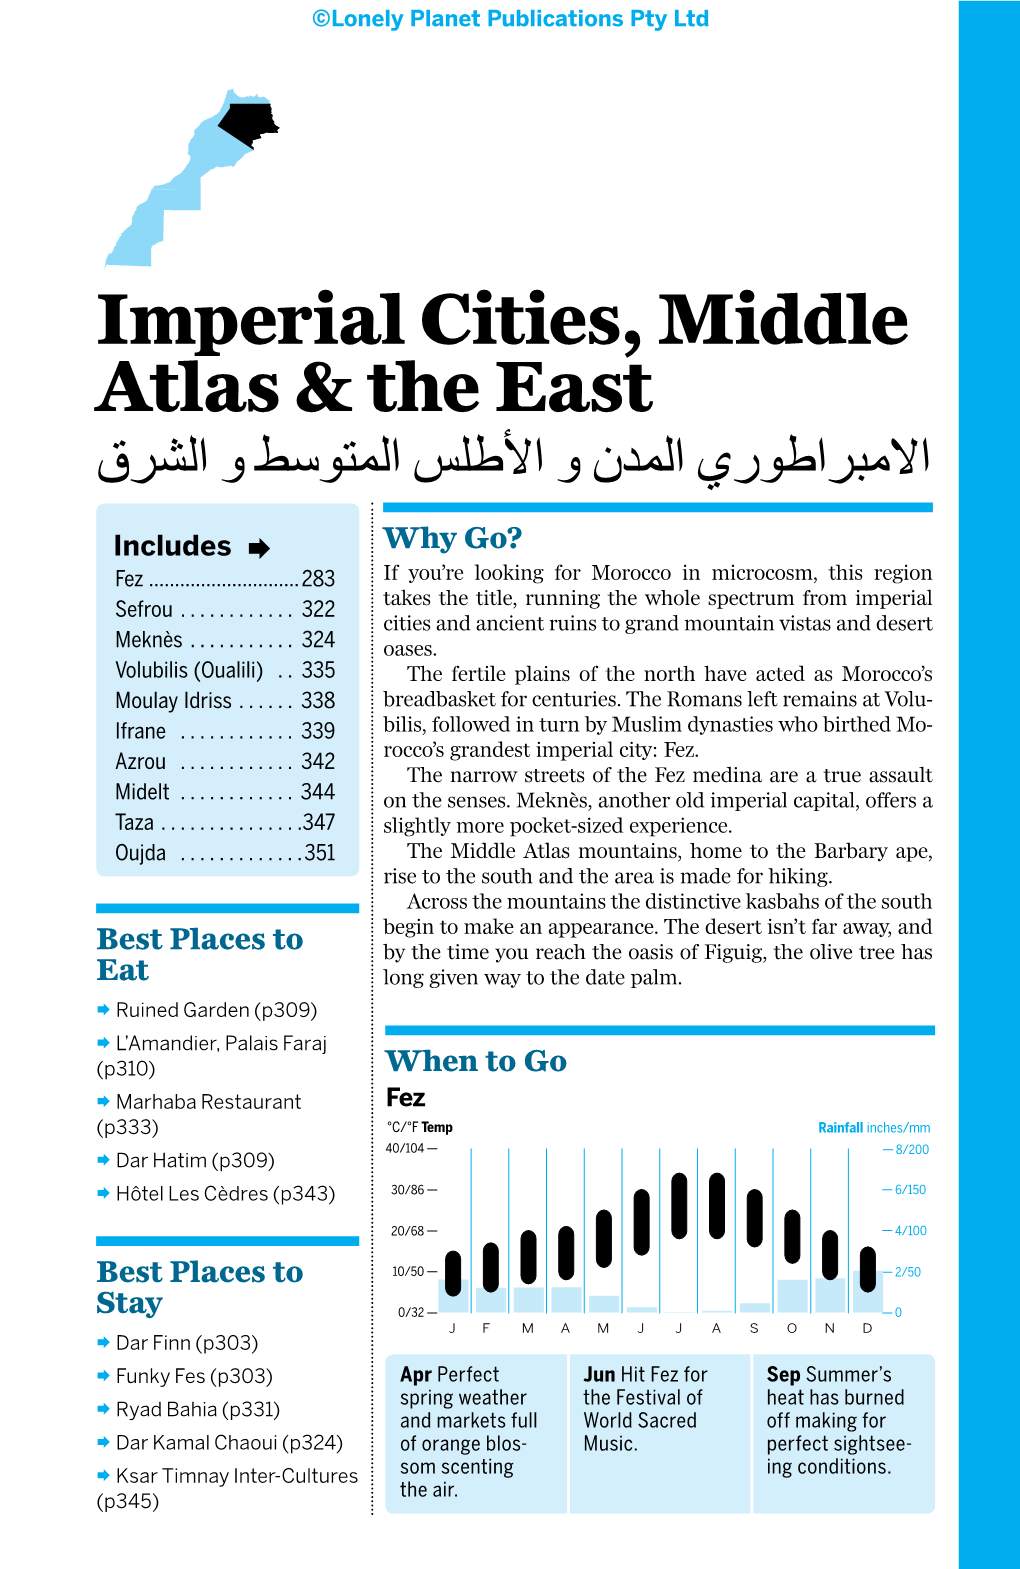 Imperial Cities, Middle Atlas & the East